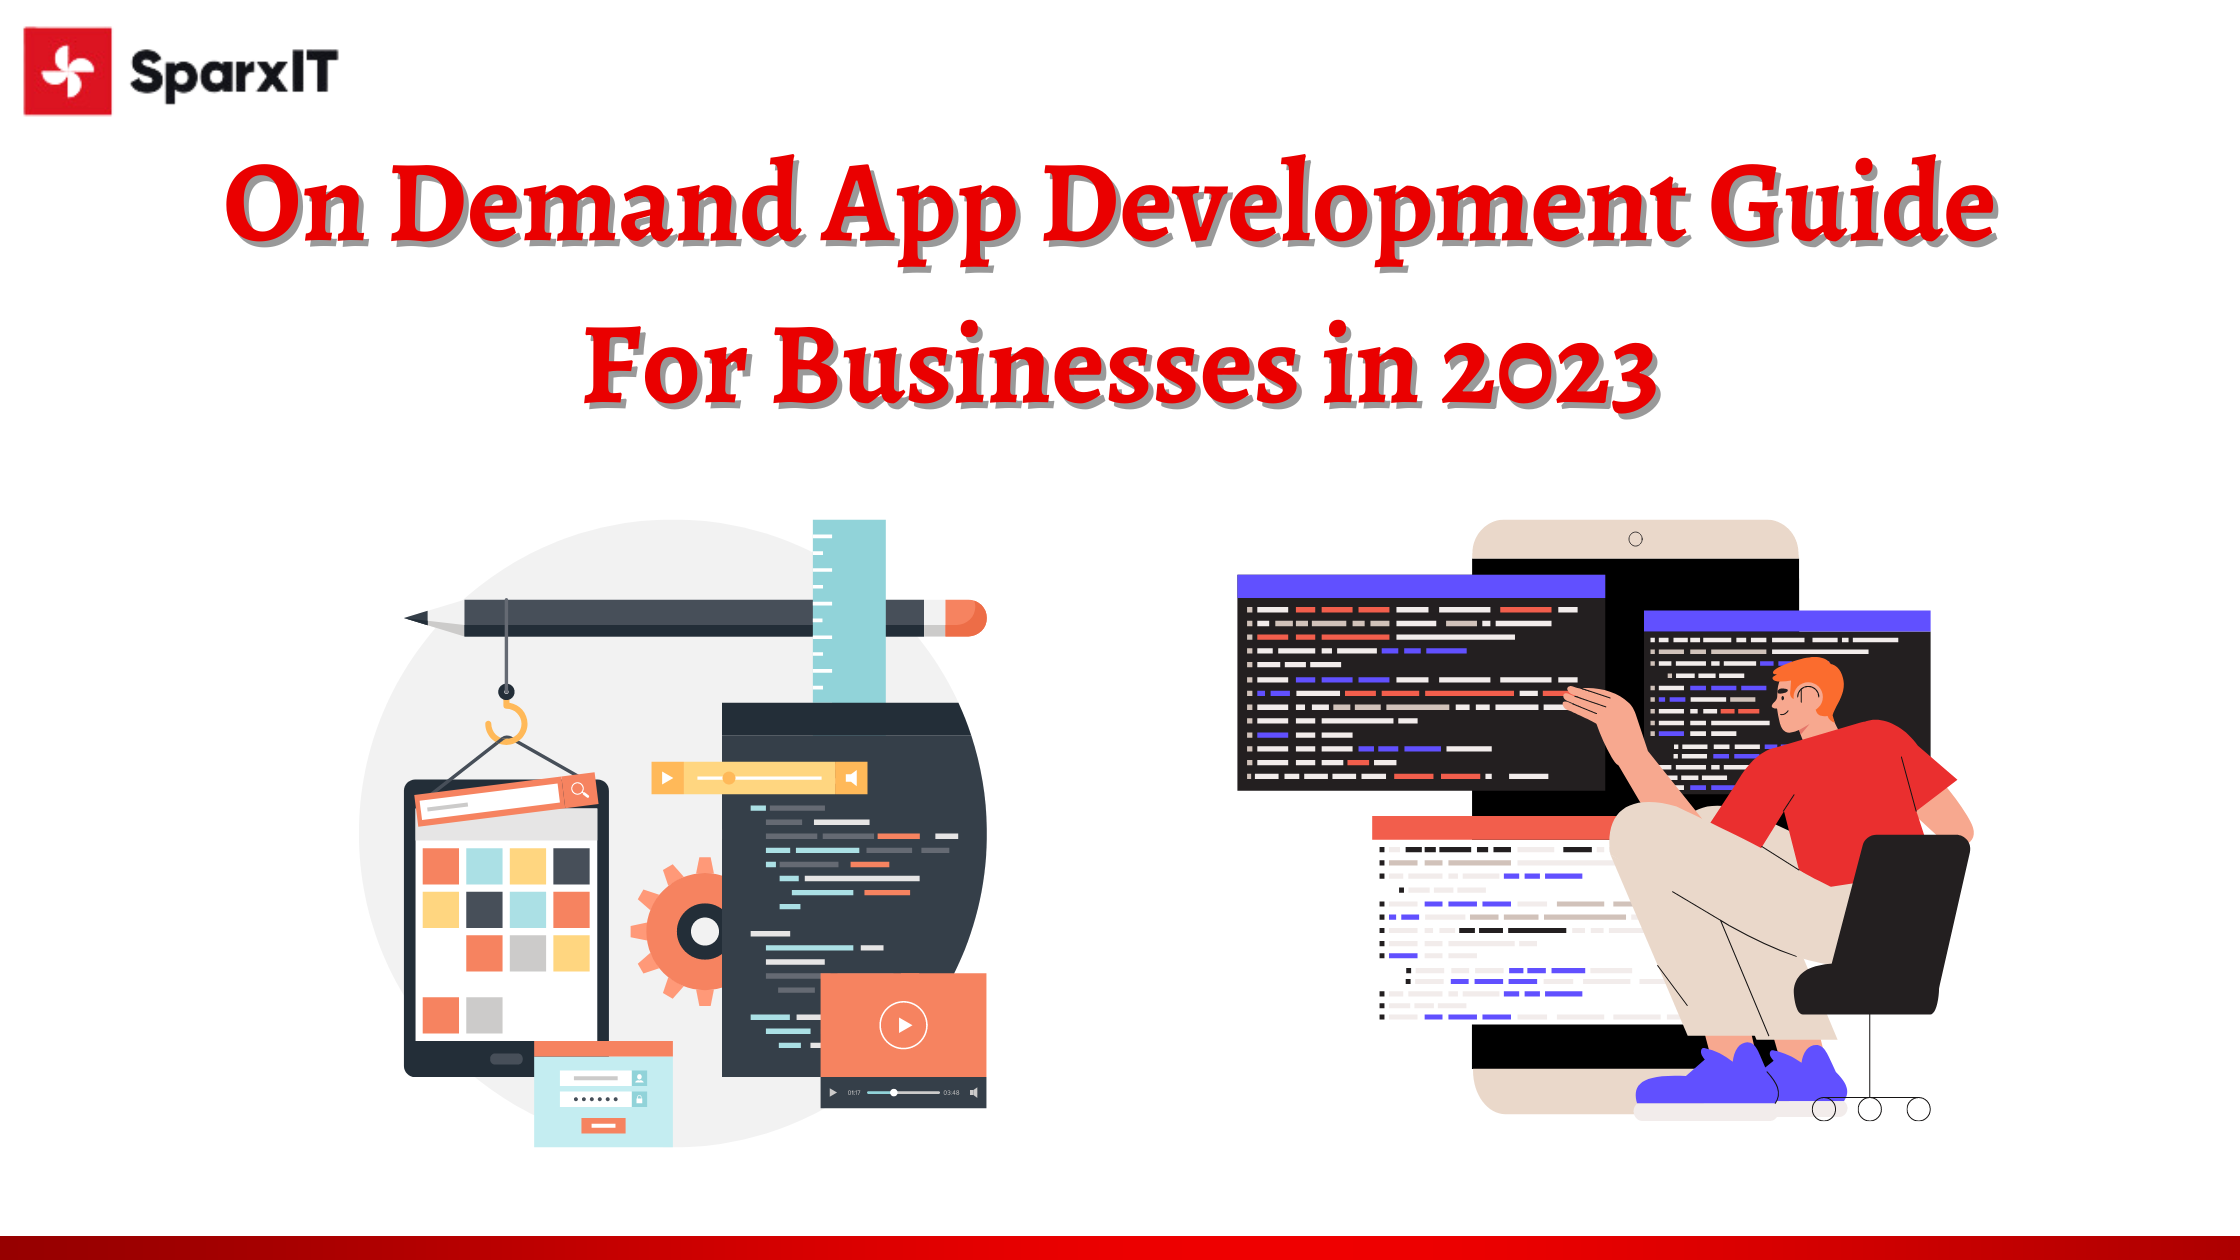 On Demand App Development Guide For Businesses in 2023